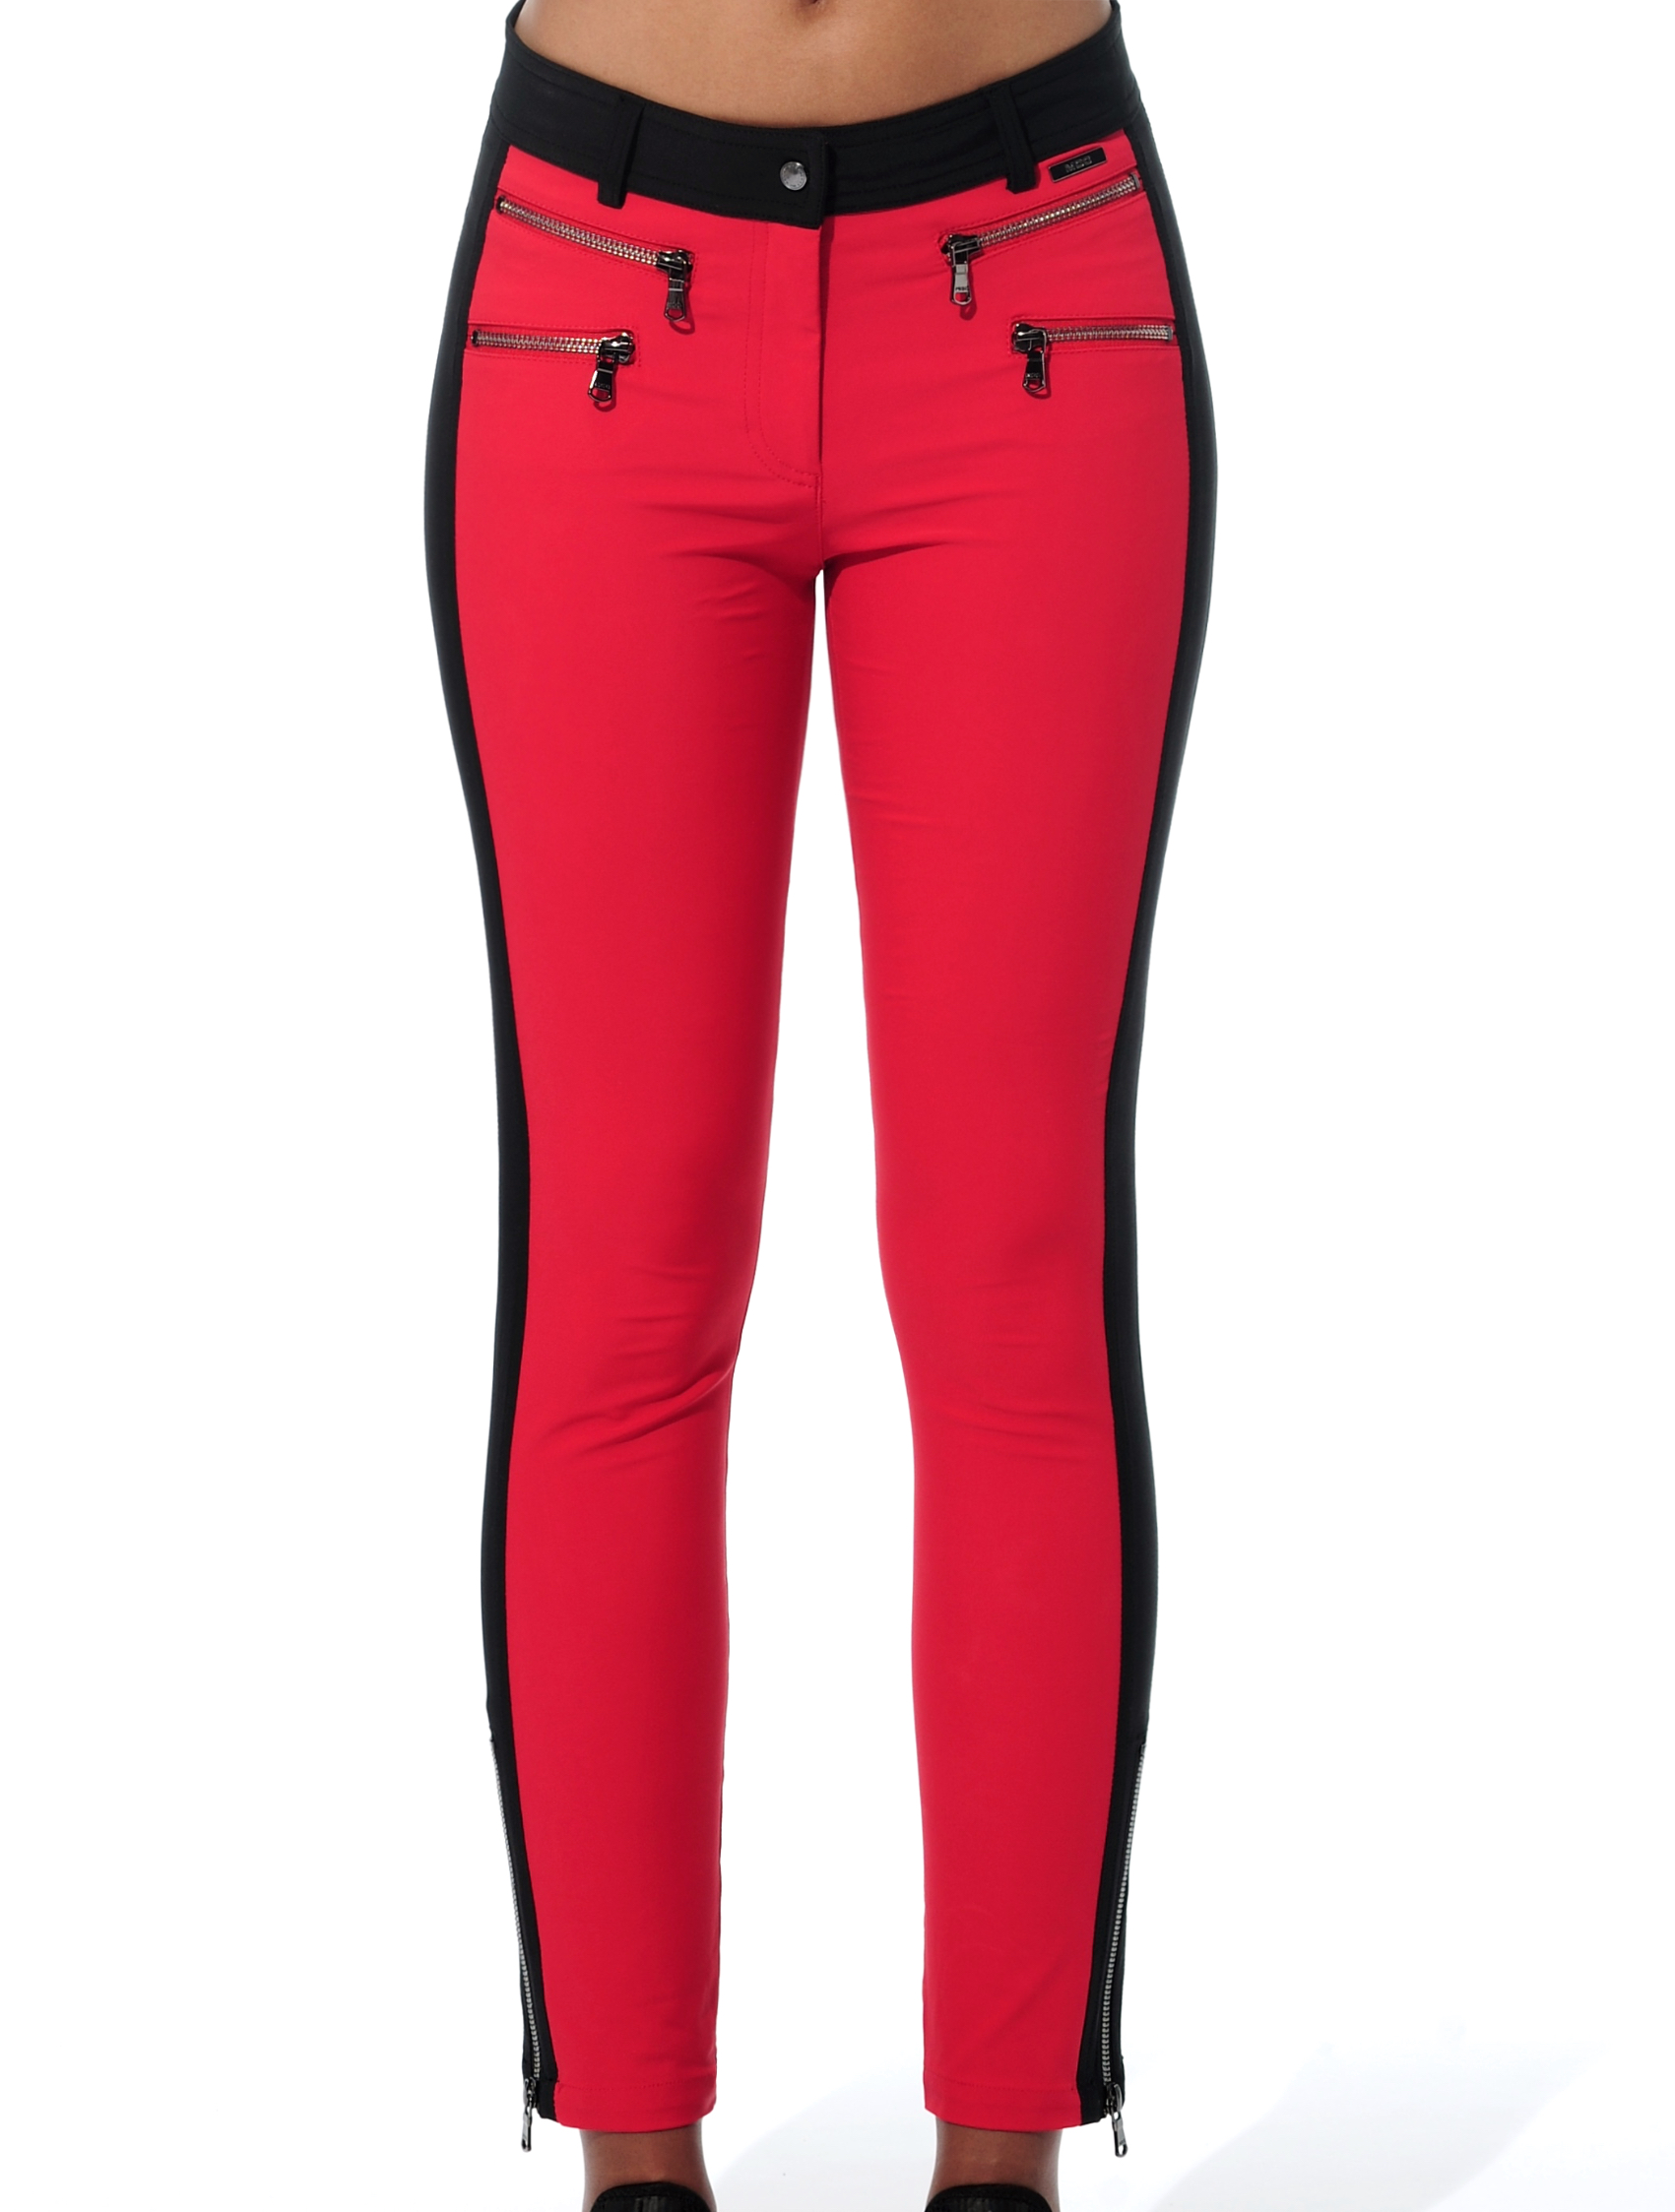 4way stretch double zip ankle pants red/black 